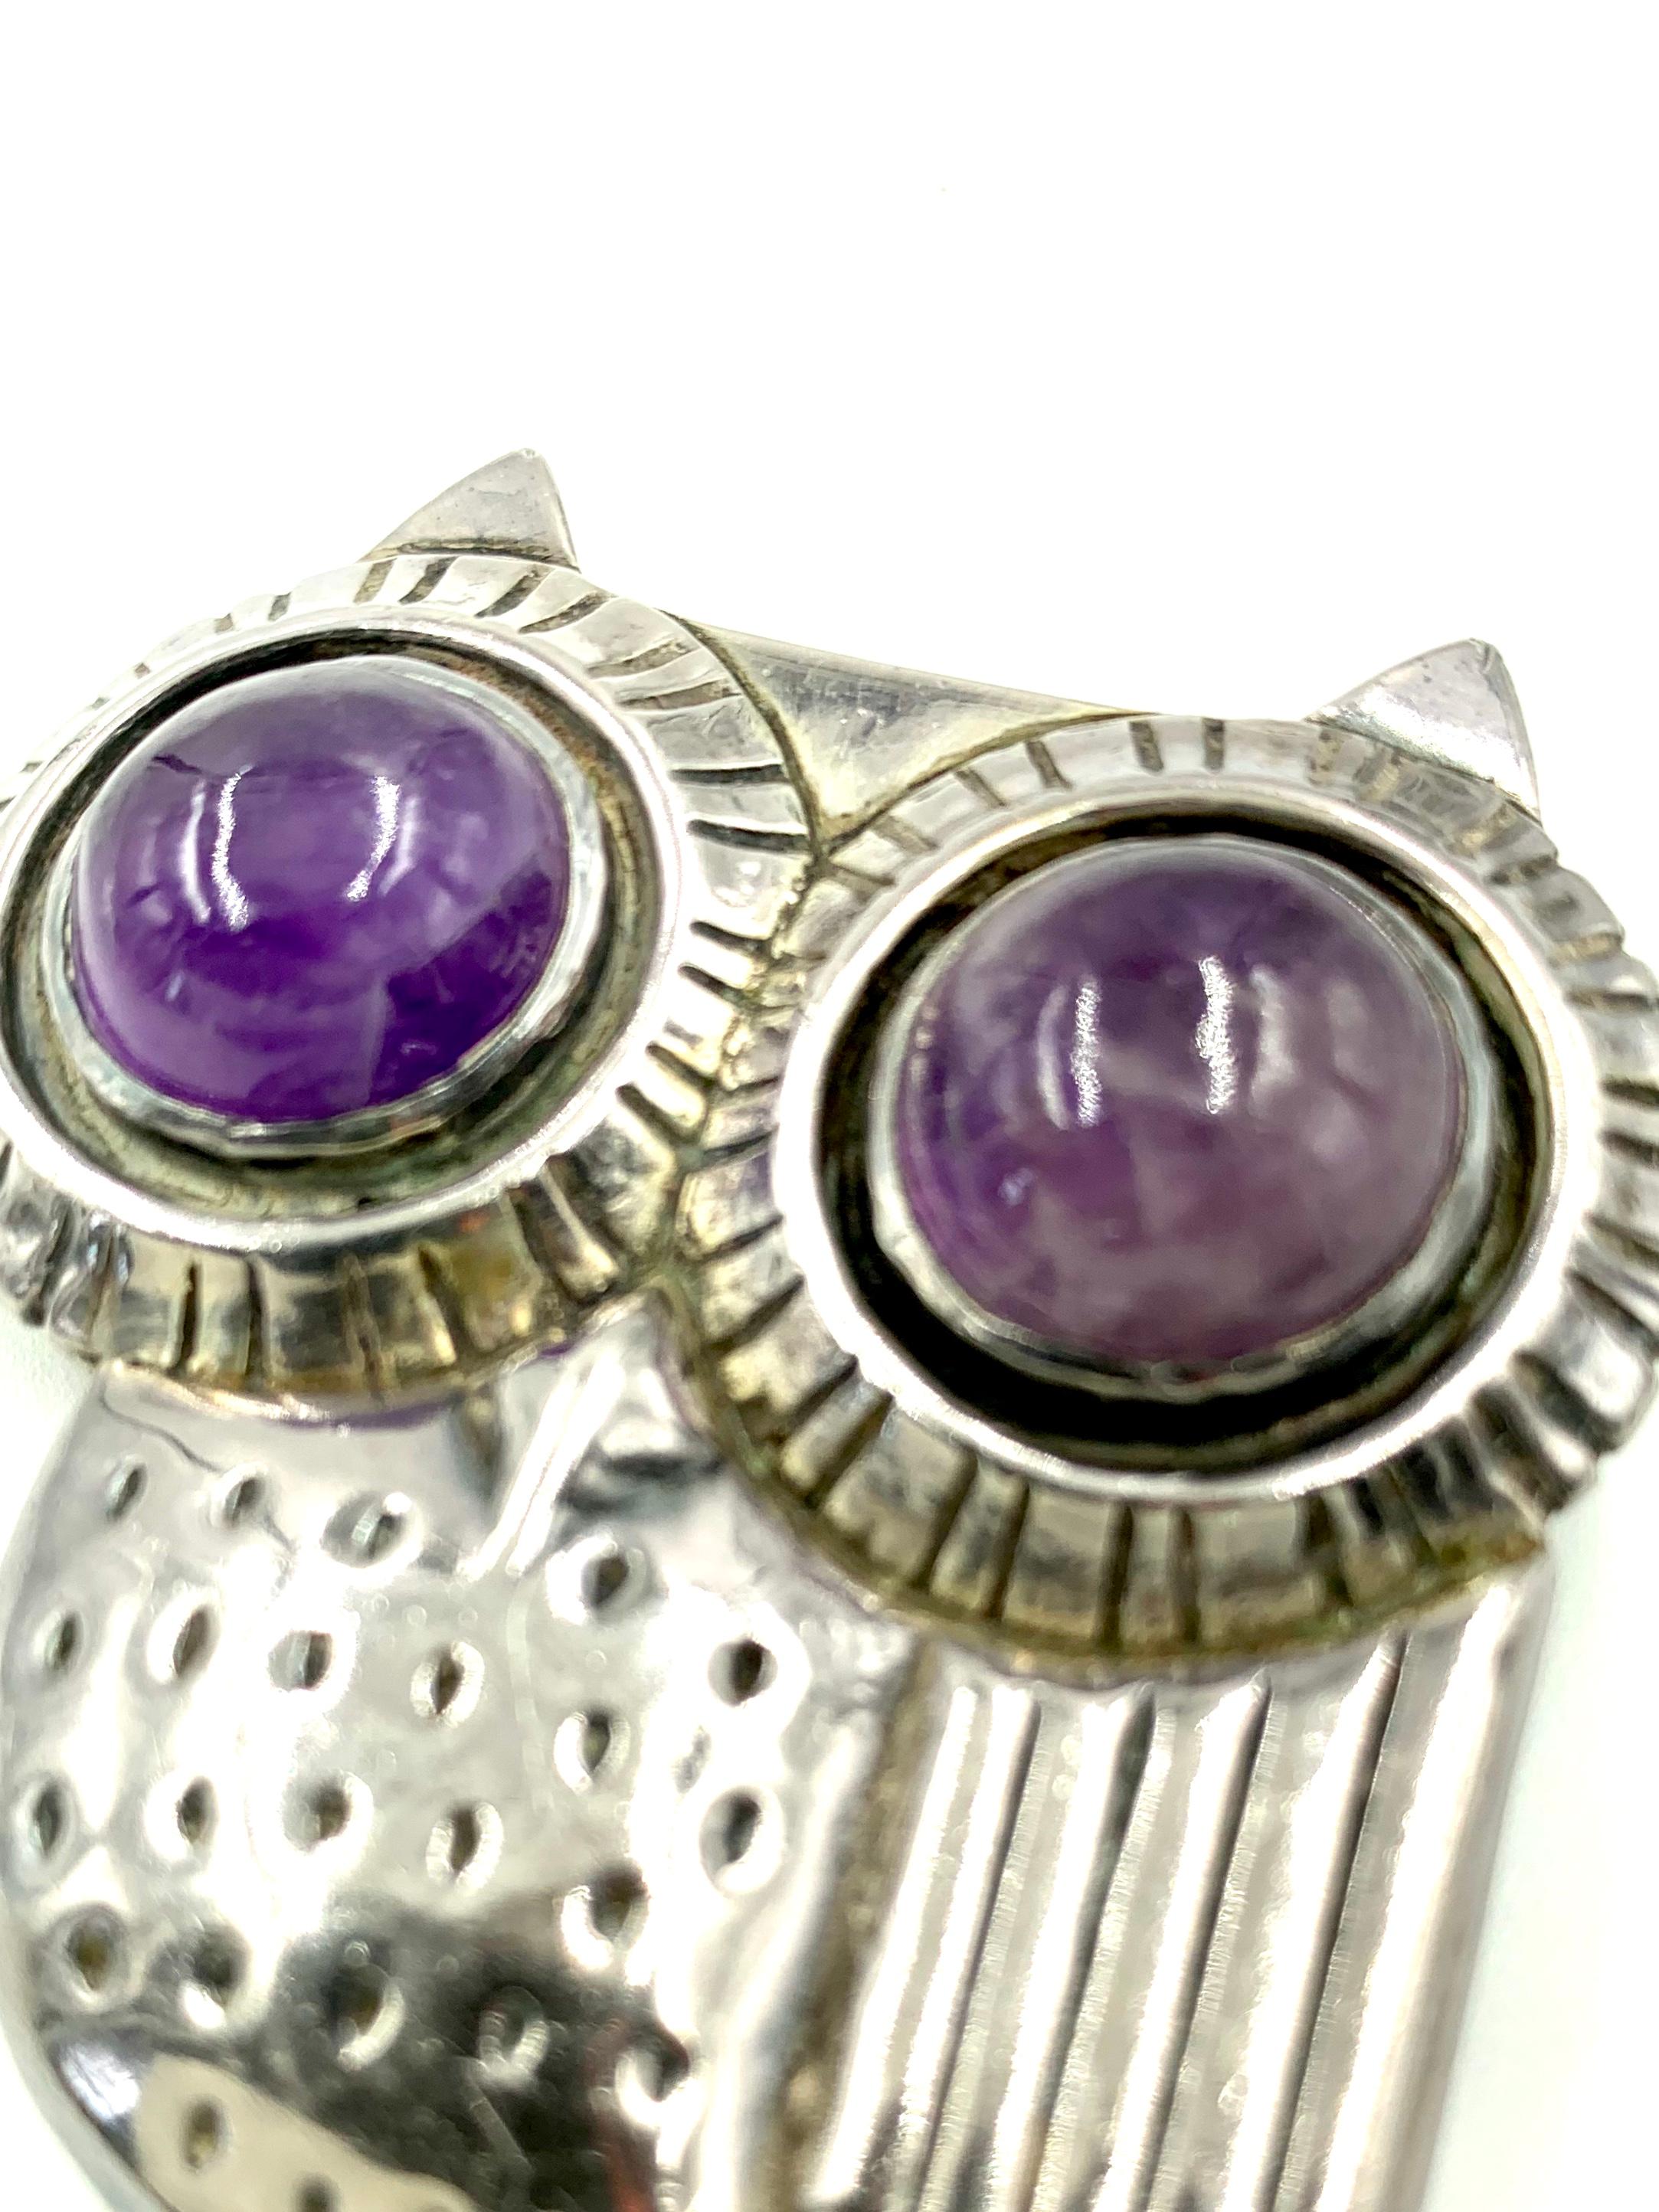 Fabulous early Spratling silver owl brooch with large cabochon amethyst eyes.
Taxco Mexican Modernist Movement
Marked in two places on back with hallmarks that date this piece to 1940-1944 - from Spratling's first design period 1931-1946
Very good